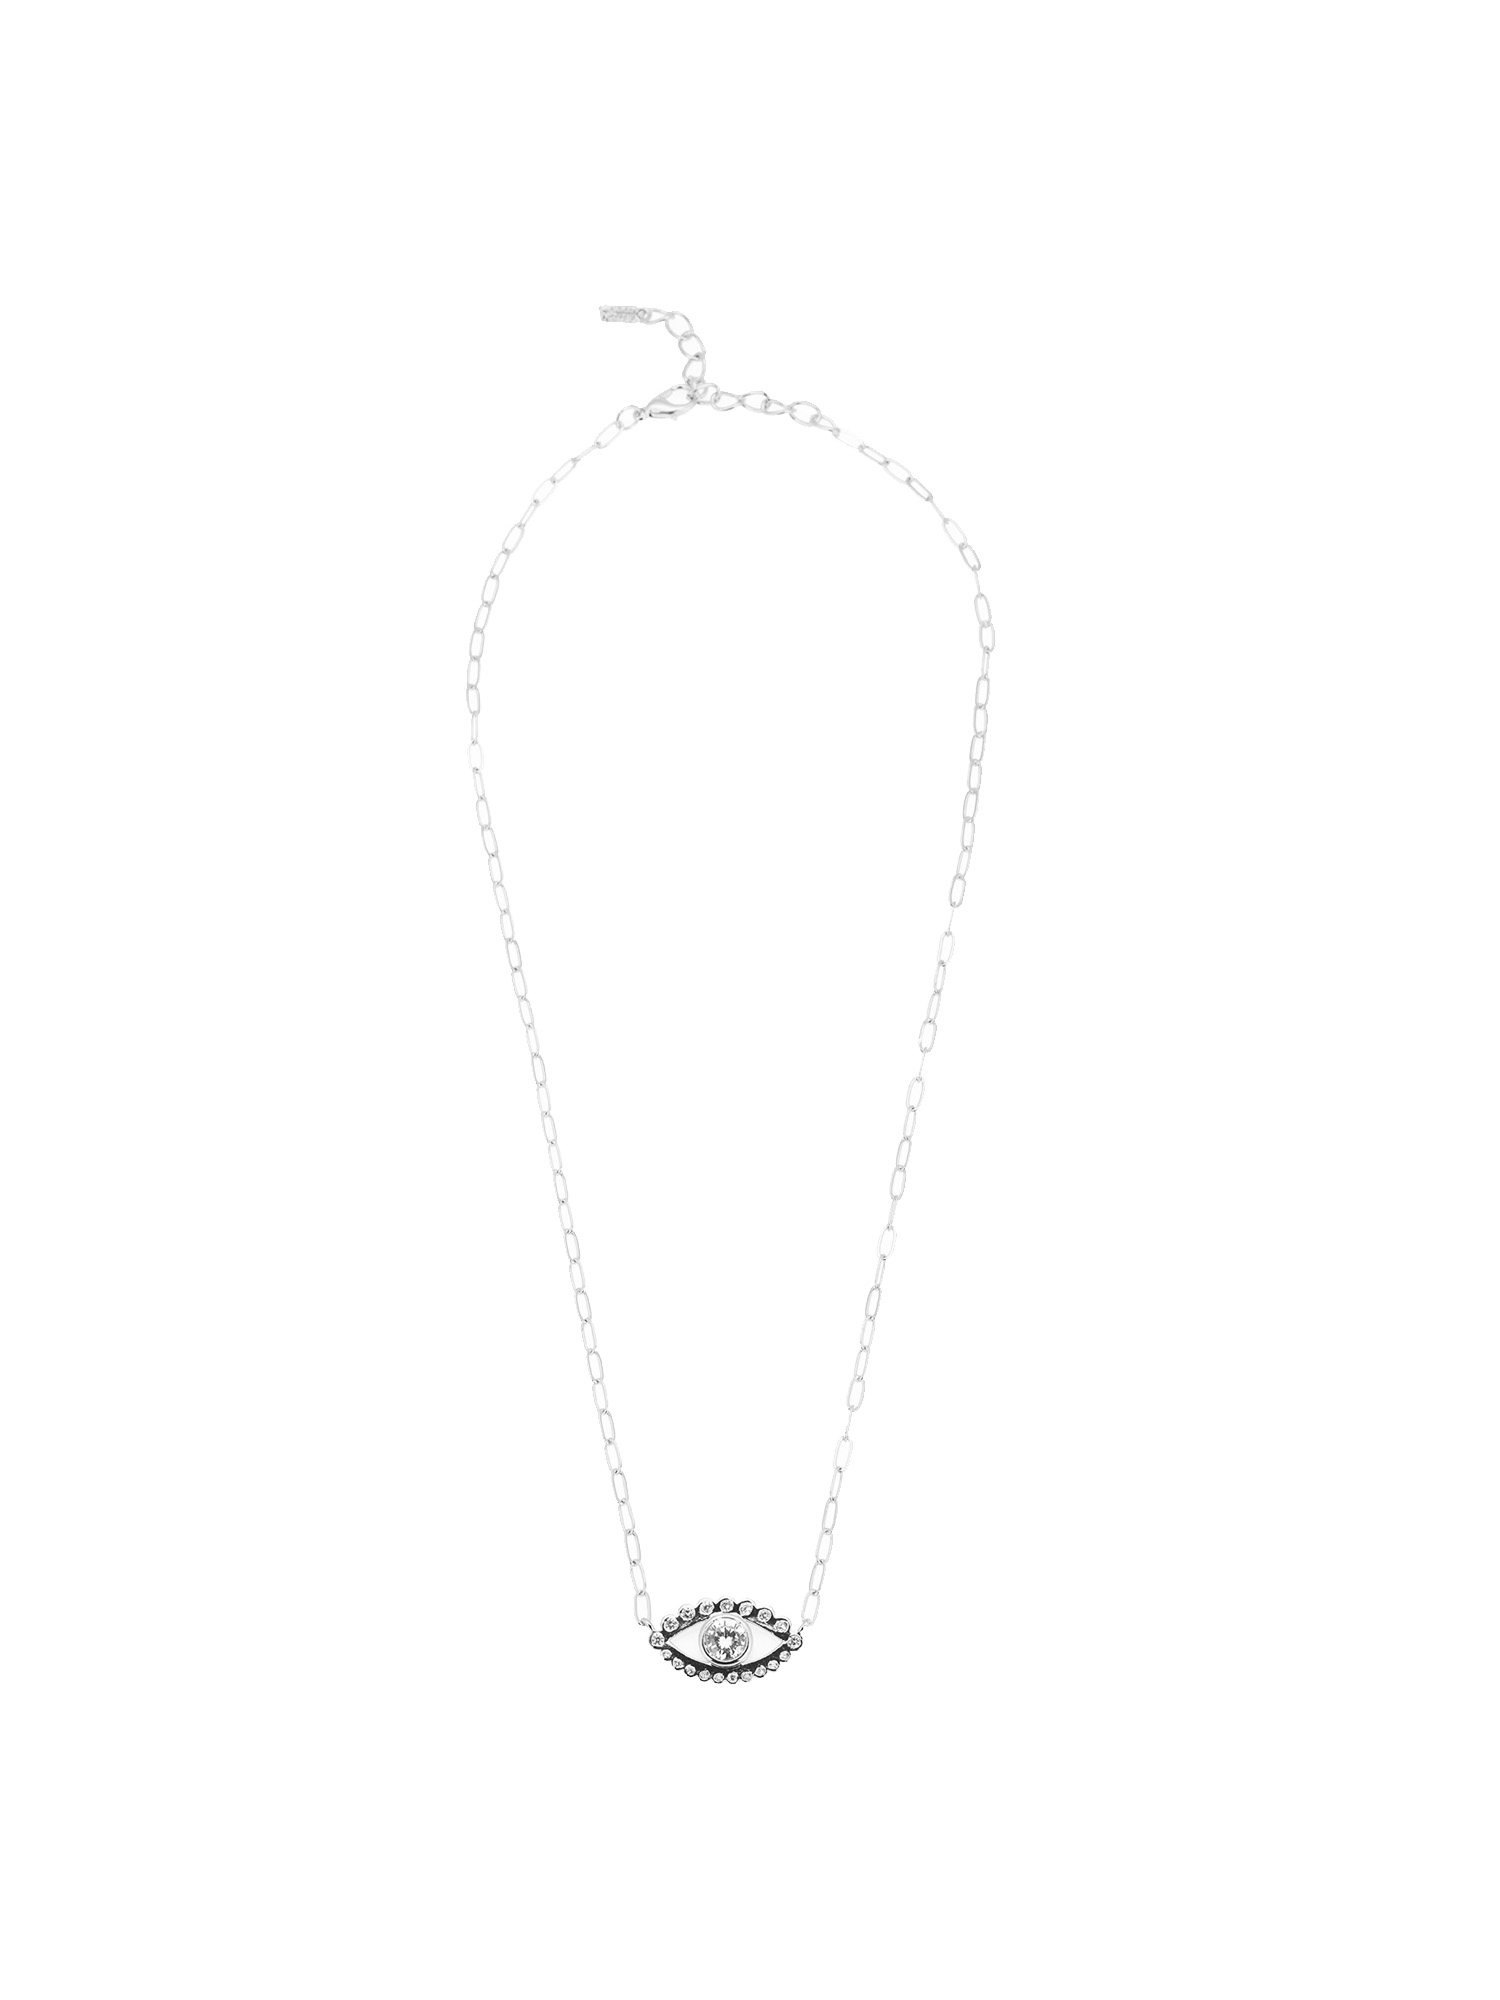 PROTECT THE WILD NECKLACE RHODIUM